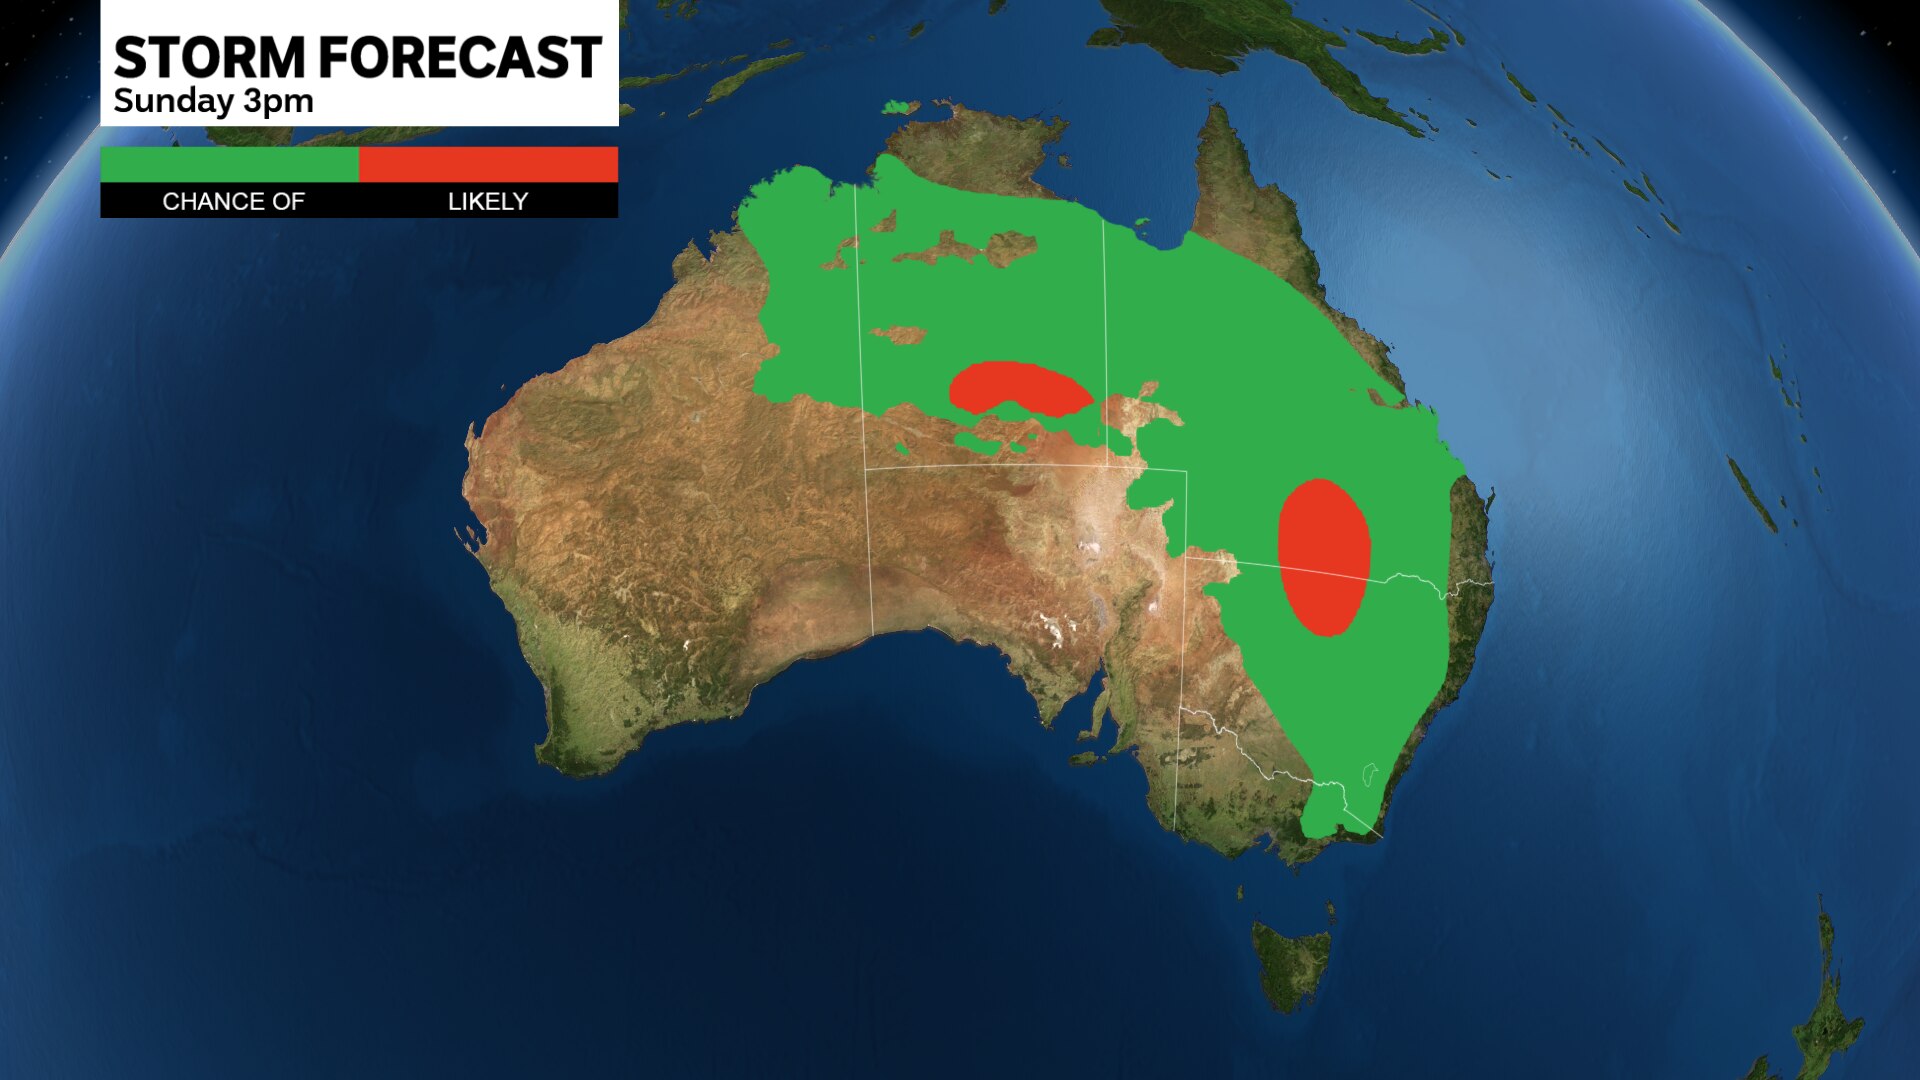 a map of australia showing patches of green and red that show where storms are forecast for sunday november 19